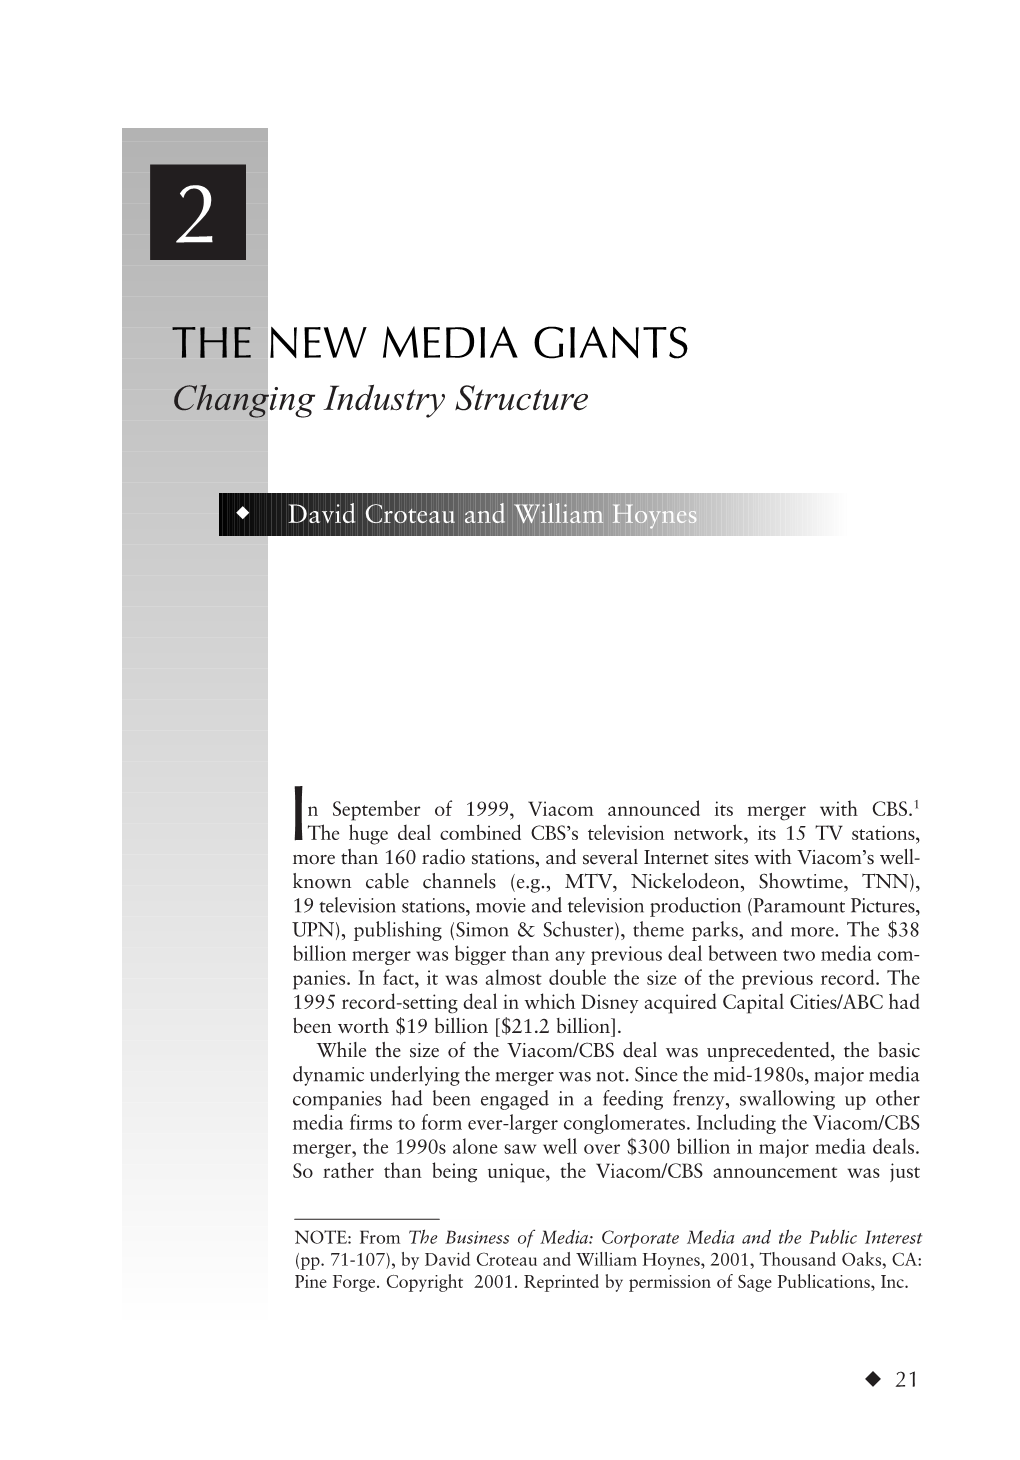 THE NEW MEDIA GIANTS Changing Industry Structure